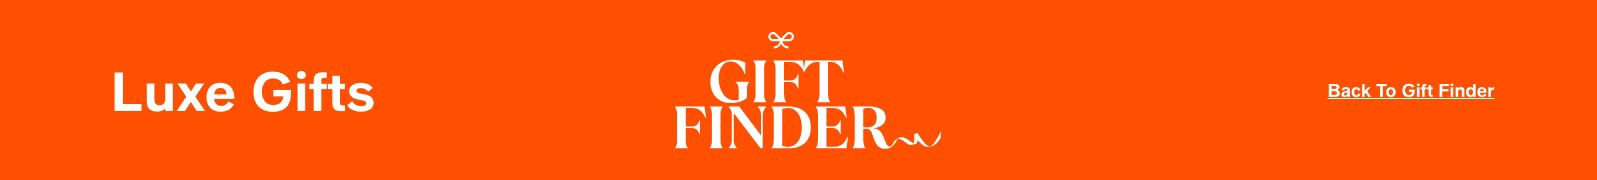 Luxe Gifts, Gift finder